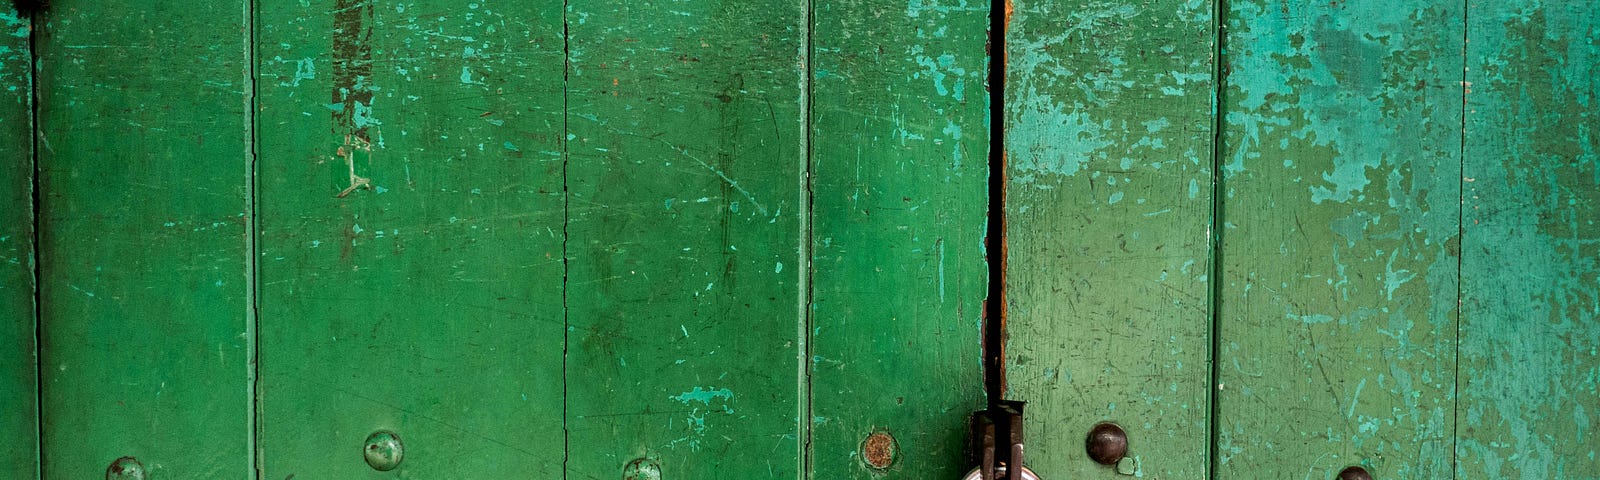 Close-up of old door made from planks of wood painted green that are now peeling, with a large, silver padlock barring entry.